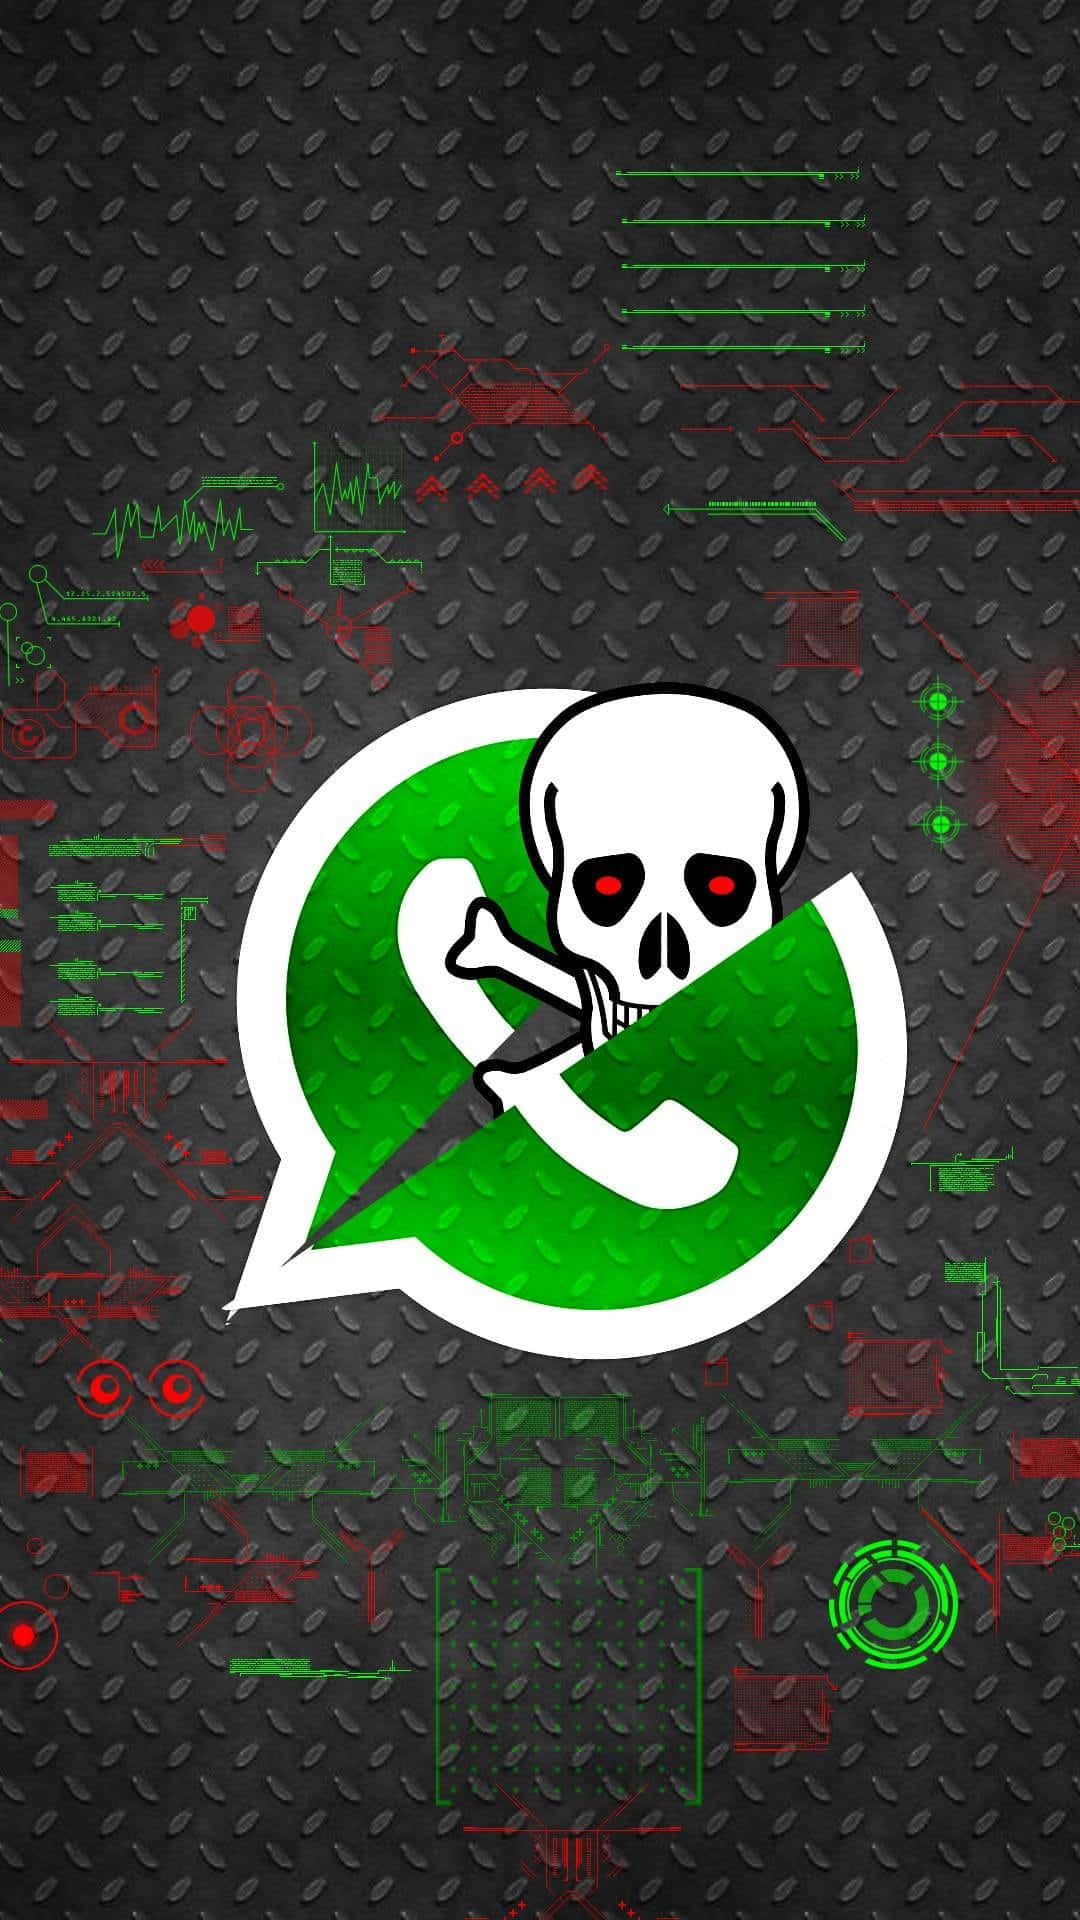 Spice up your Whatsapp Chat with this captivating background